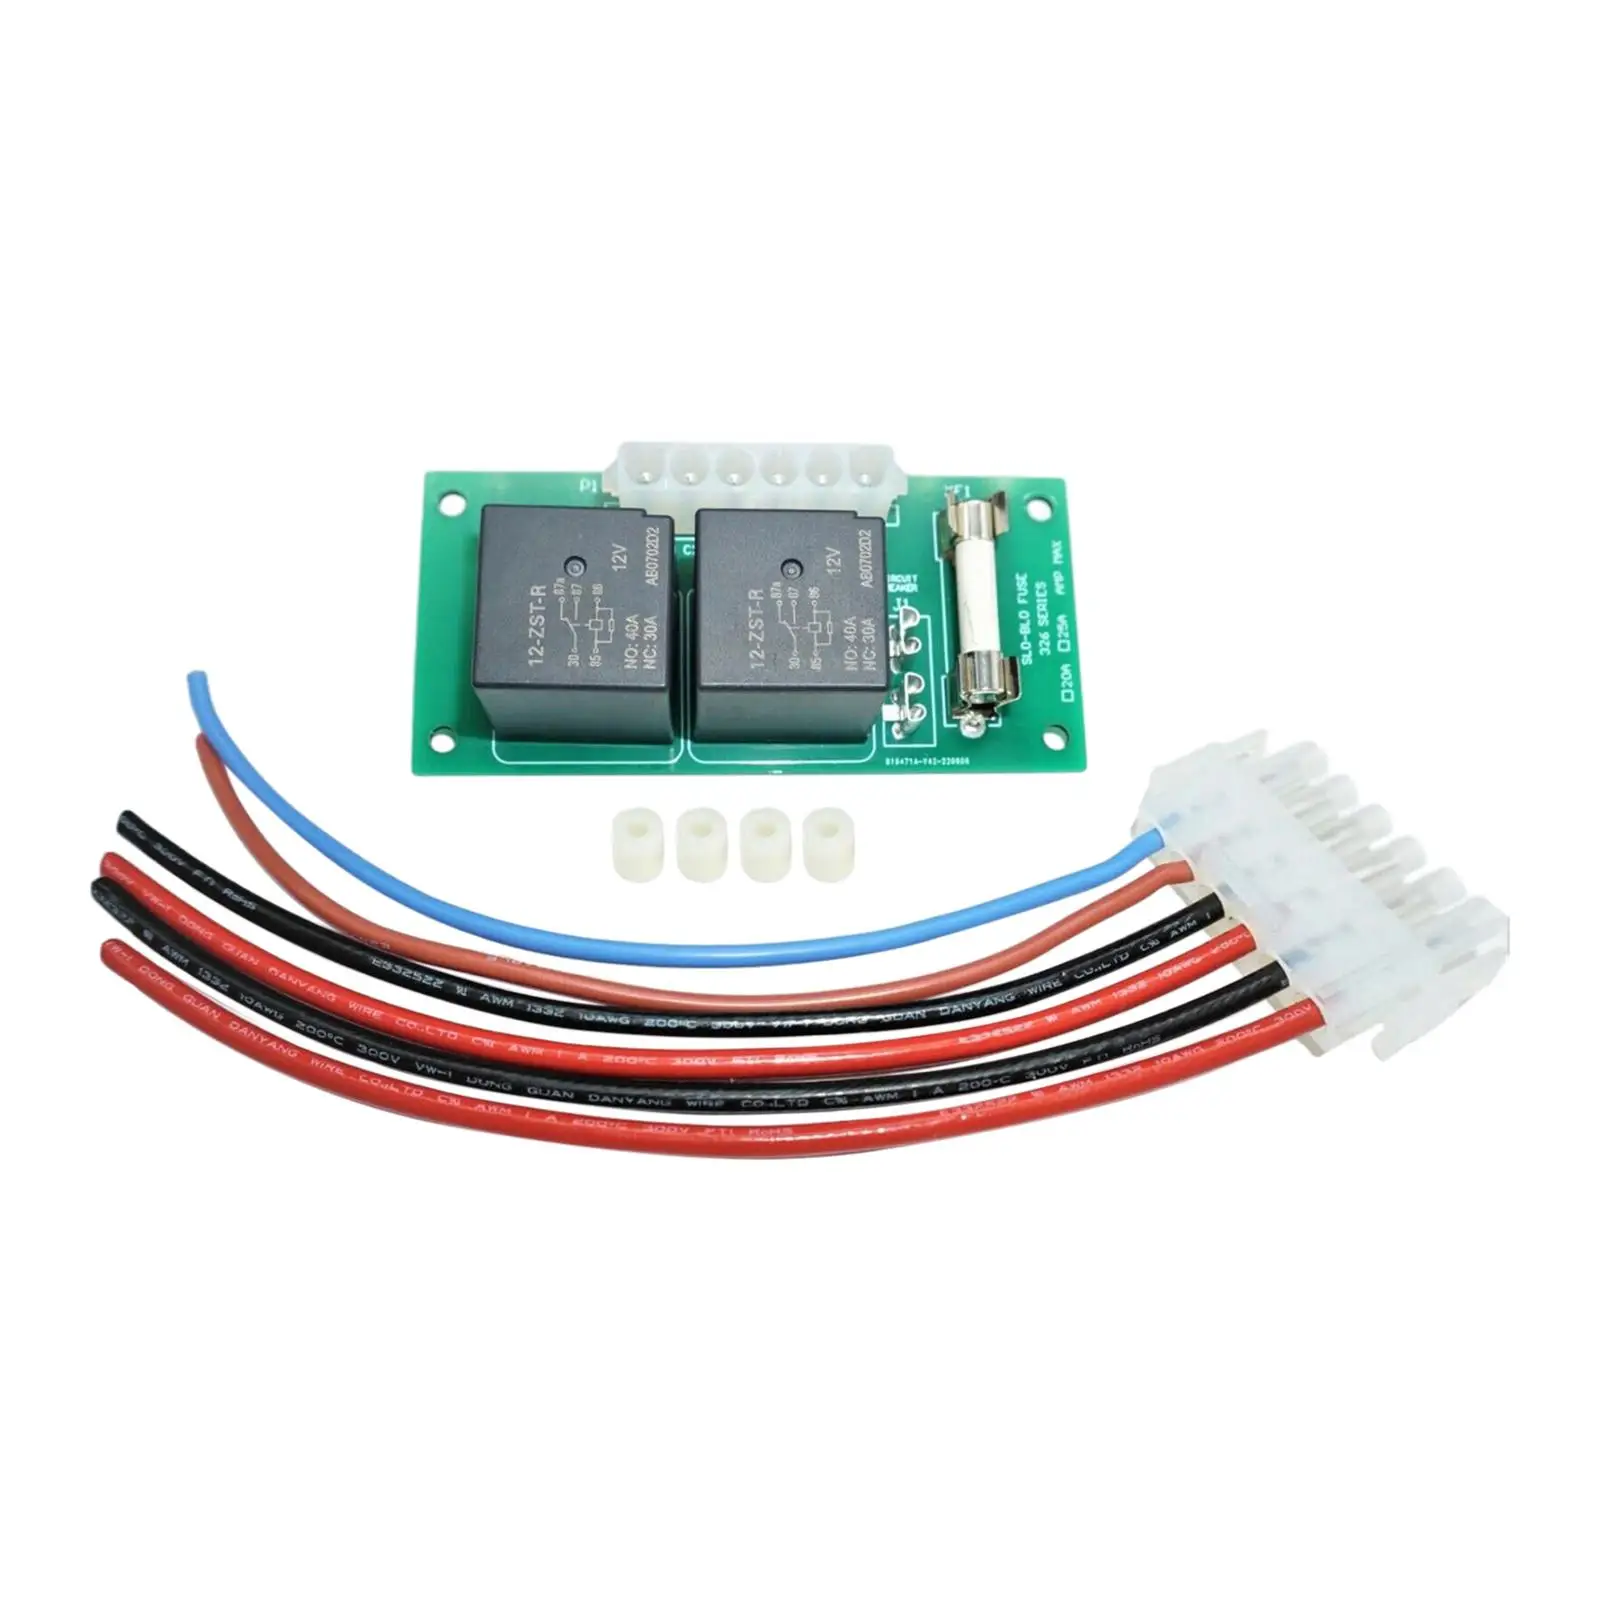 140-1130 Slide Out Relay Control Board Durable Repair Automotive Replacement RV Vehicle Wire Harness Controller with Spacers